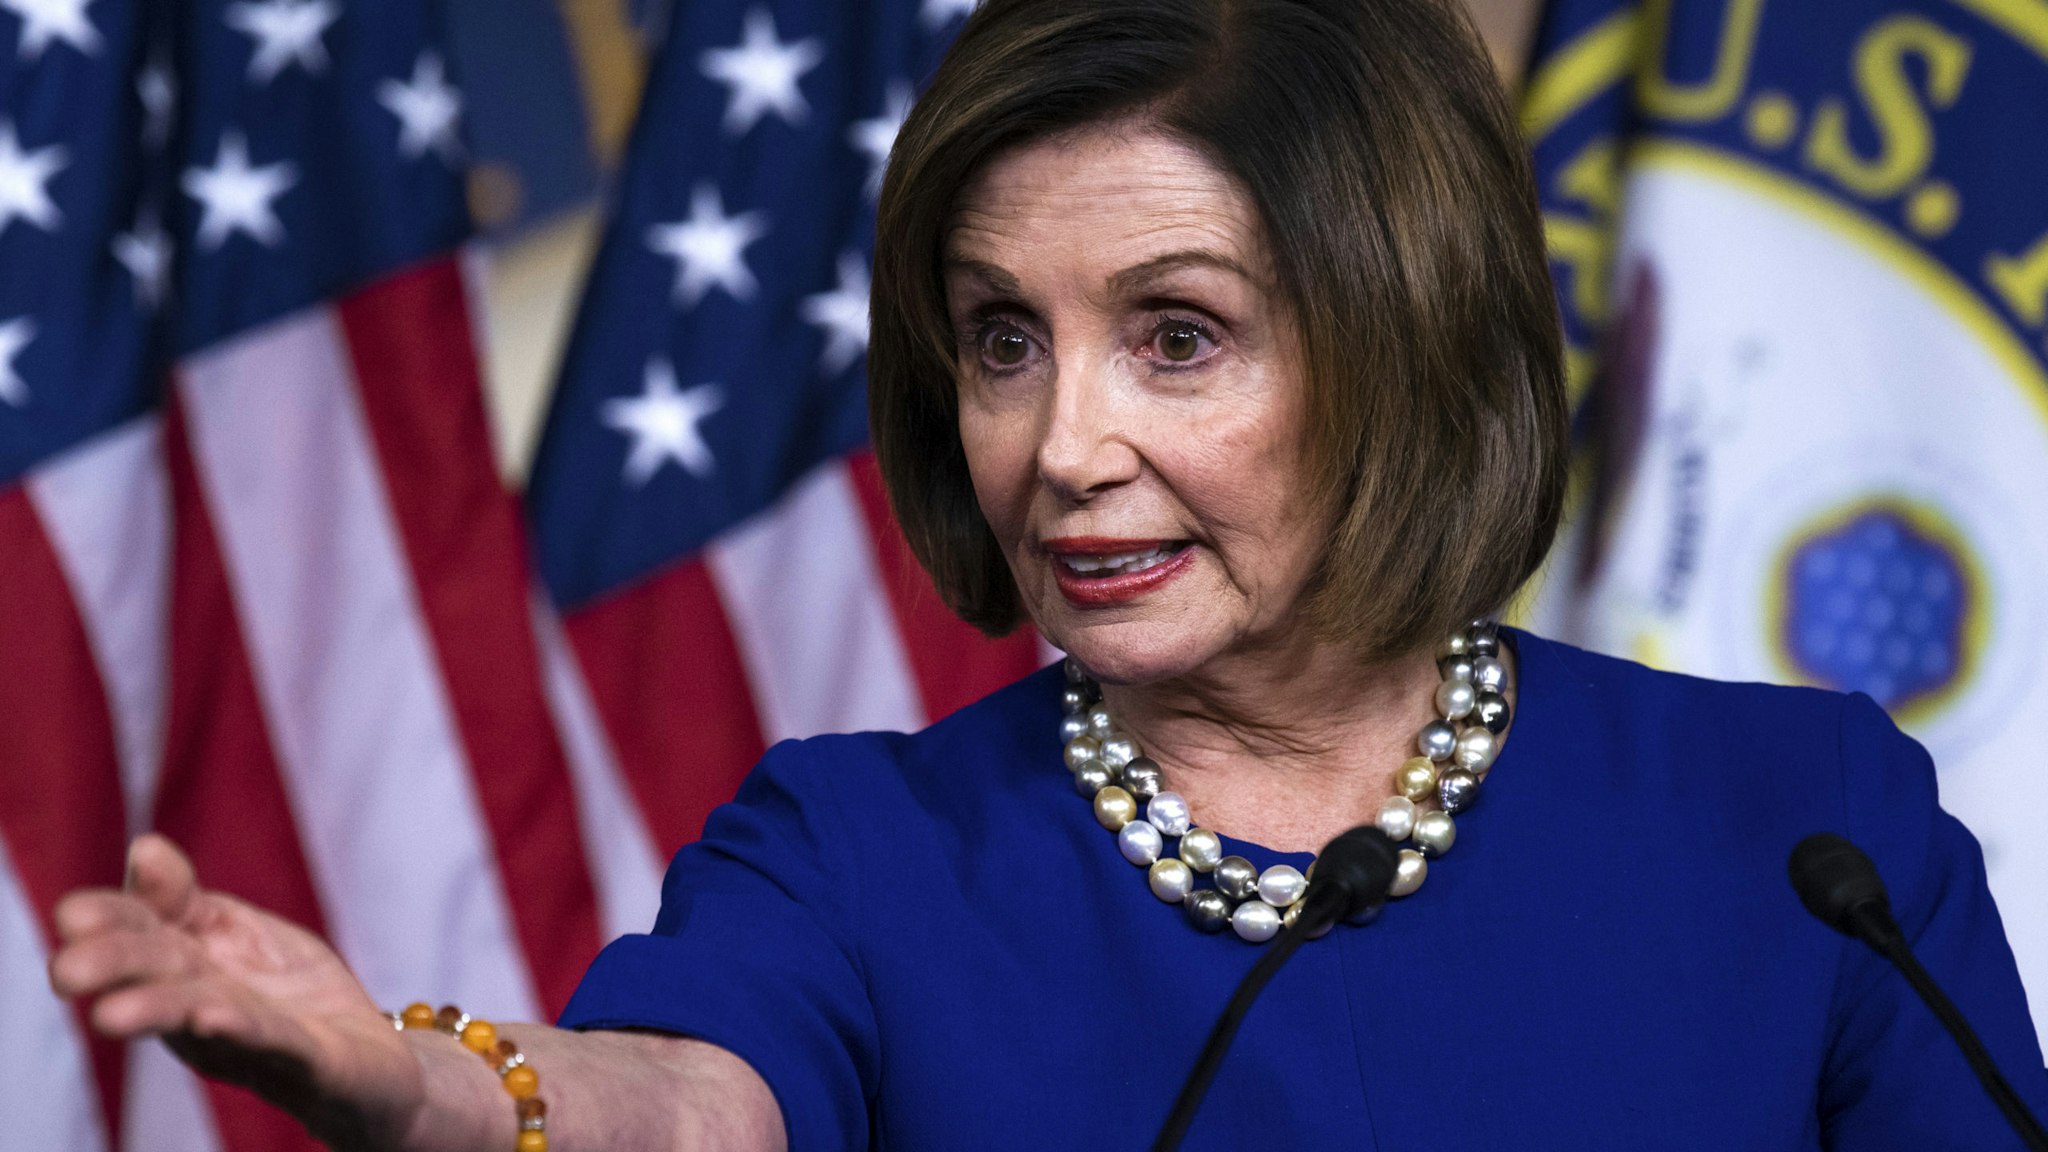 UNITED STATES - FEBRUARY 06: Speaker of the House Nancy Pelosi, D-Calif., conducts her weekly news conference in the Capitol Visitor Center on Thursday, February 6, 2020.